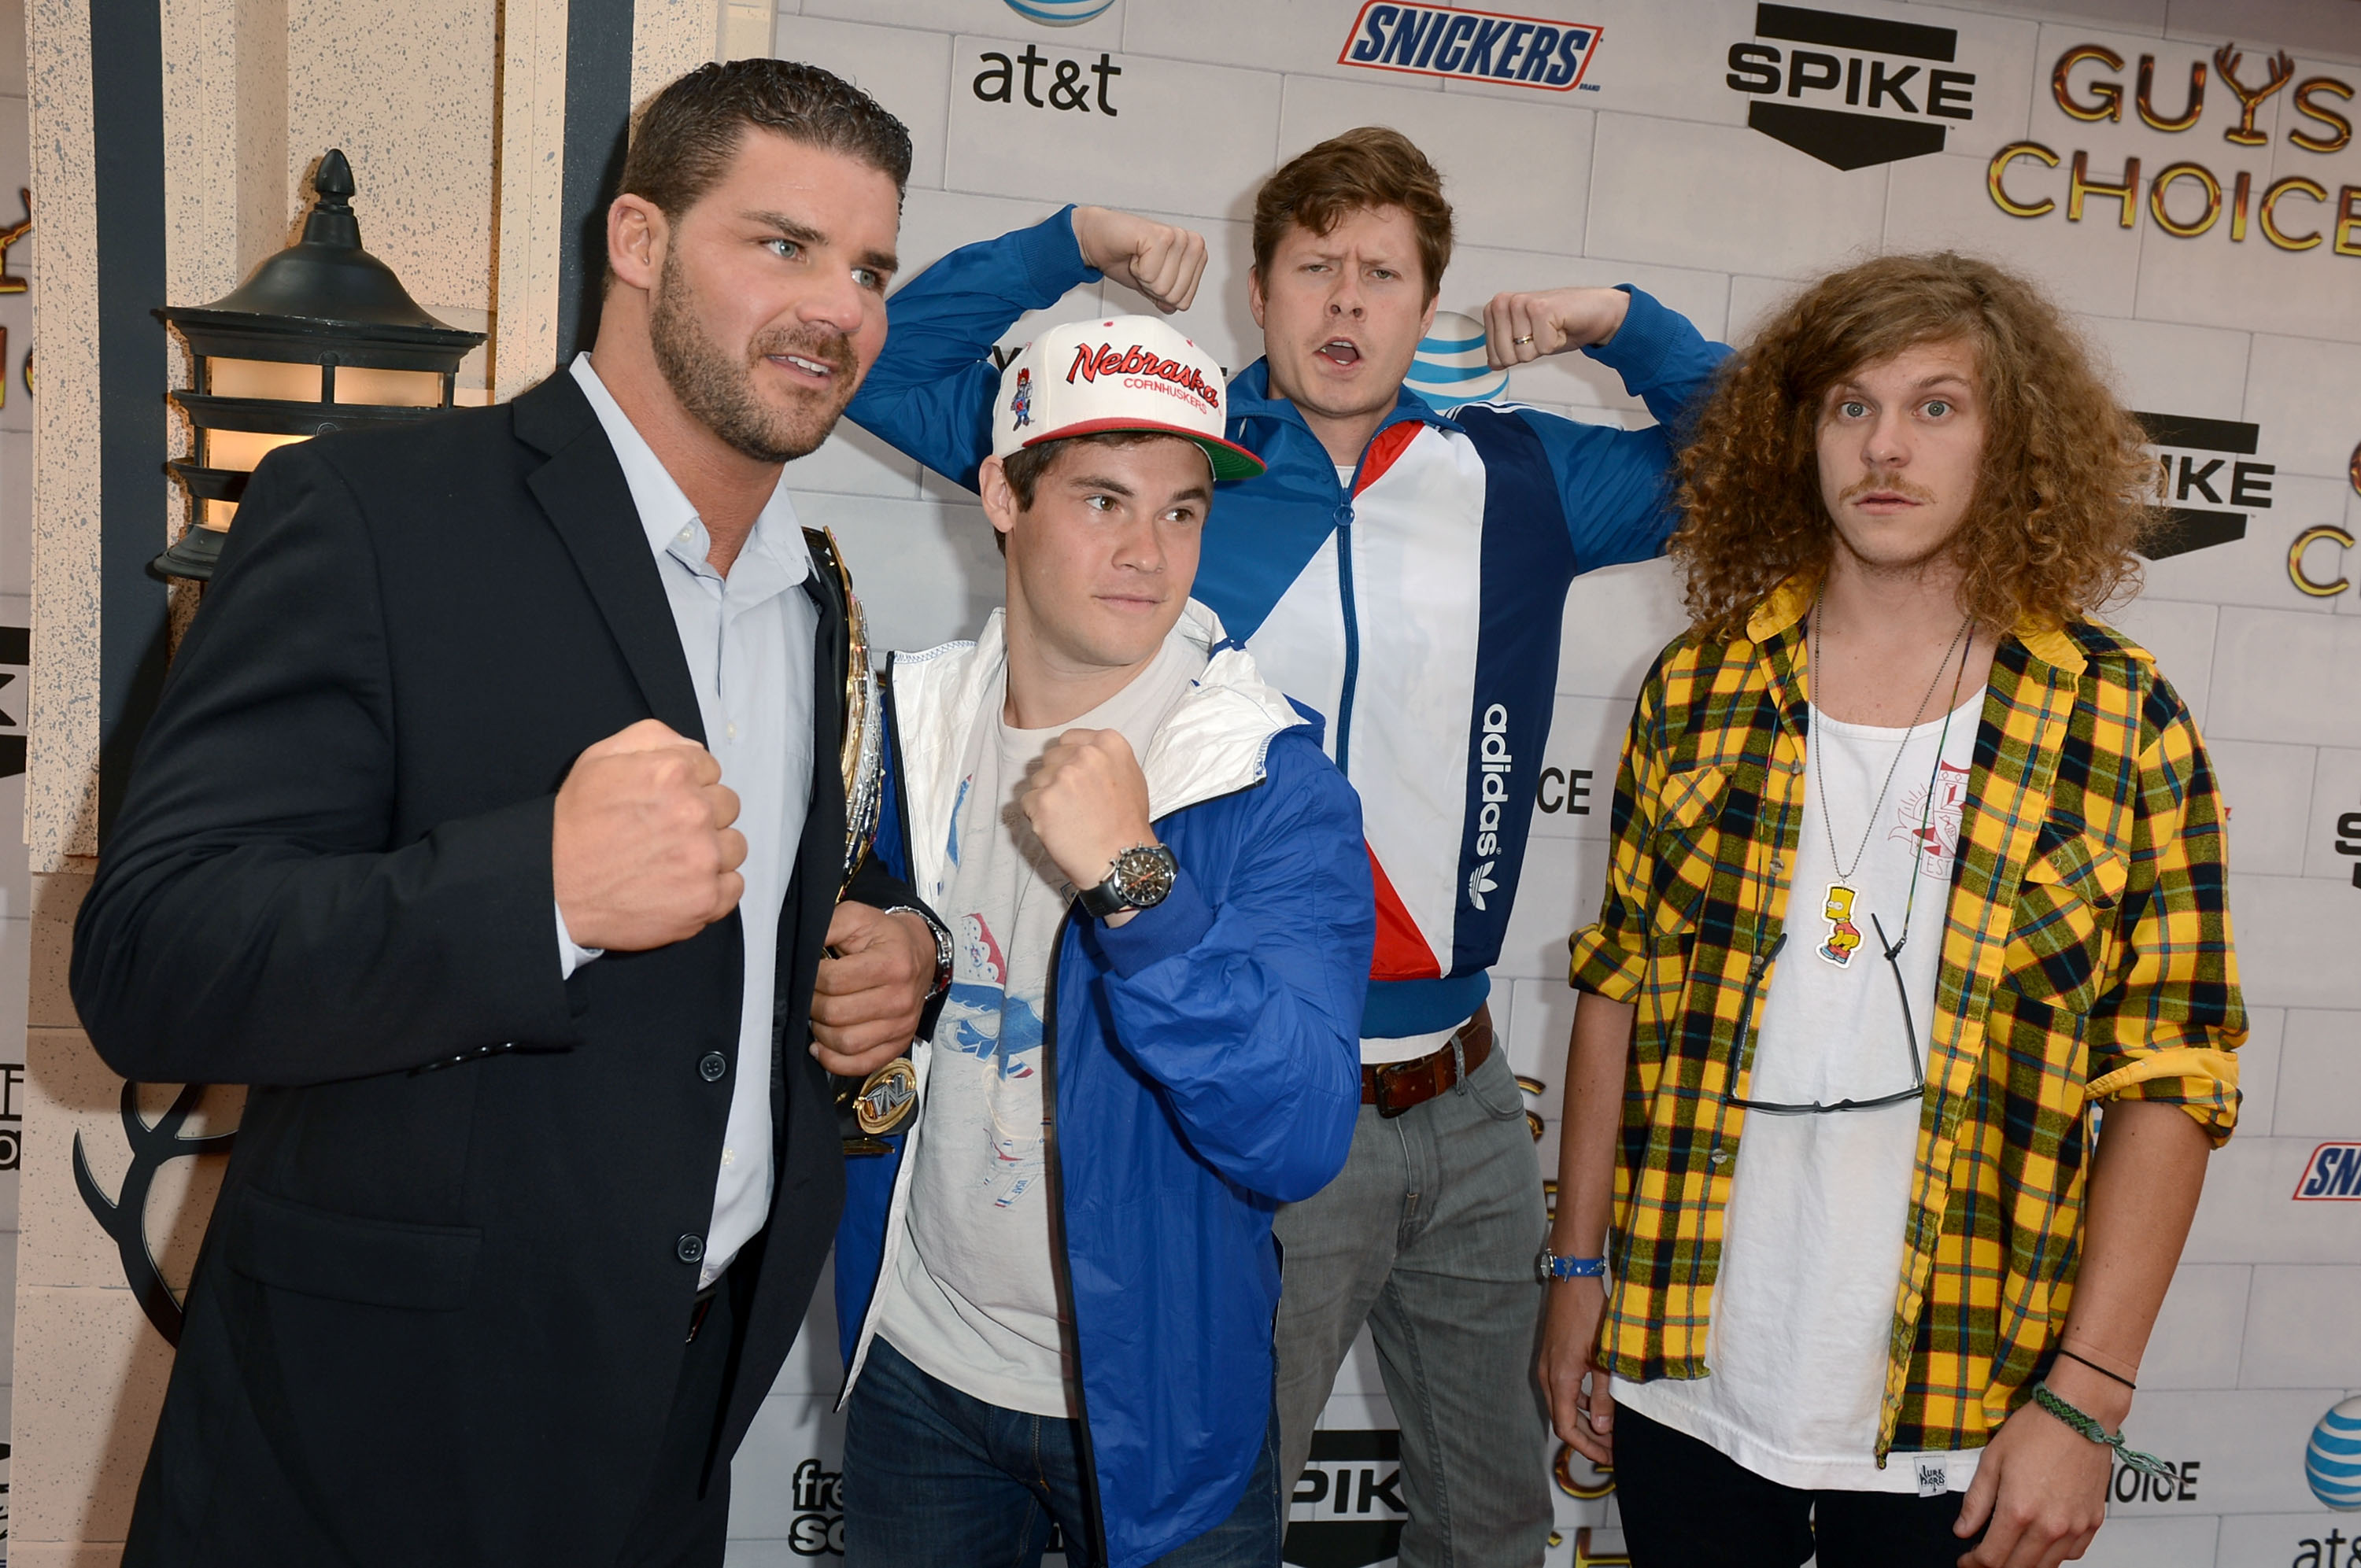 CULVER CITY, CA - JUNE 02:  (L-R) Professional wrestler Bobby Roode with actors Adam DeVine, Anders Holm, and Blake Anderson arrive at Spike TV's 6th Annual 